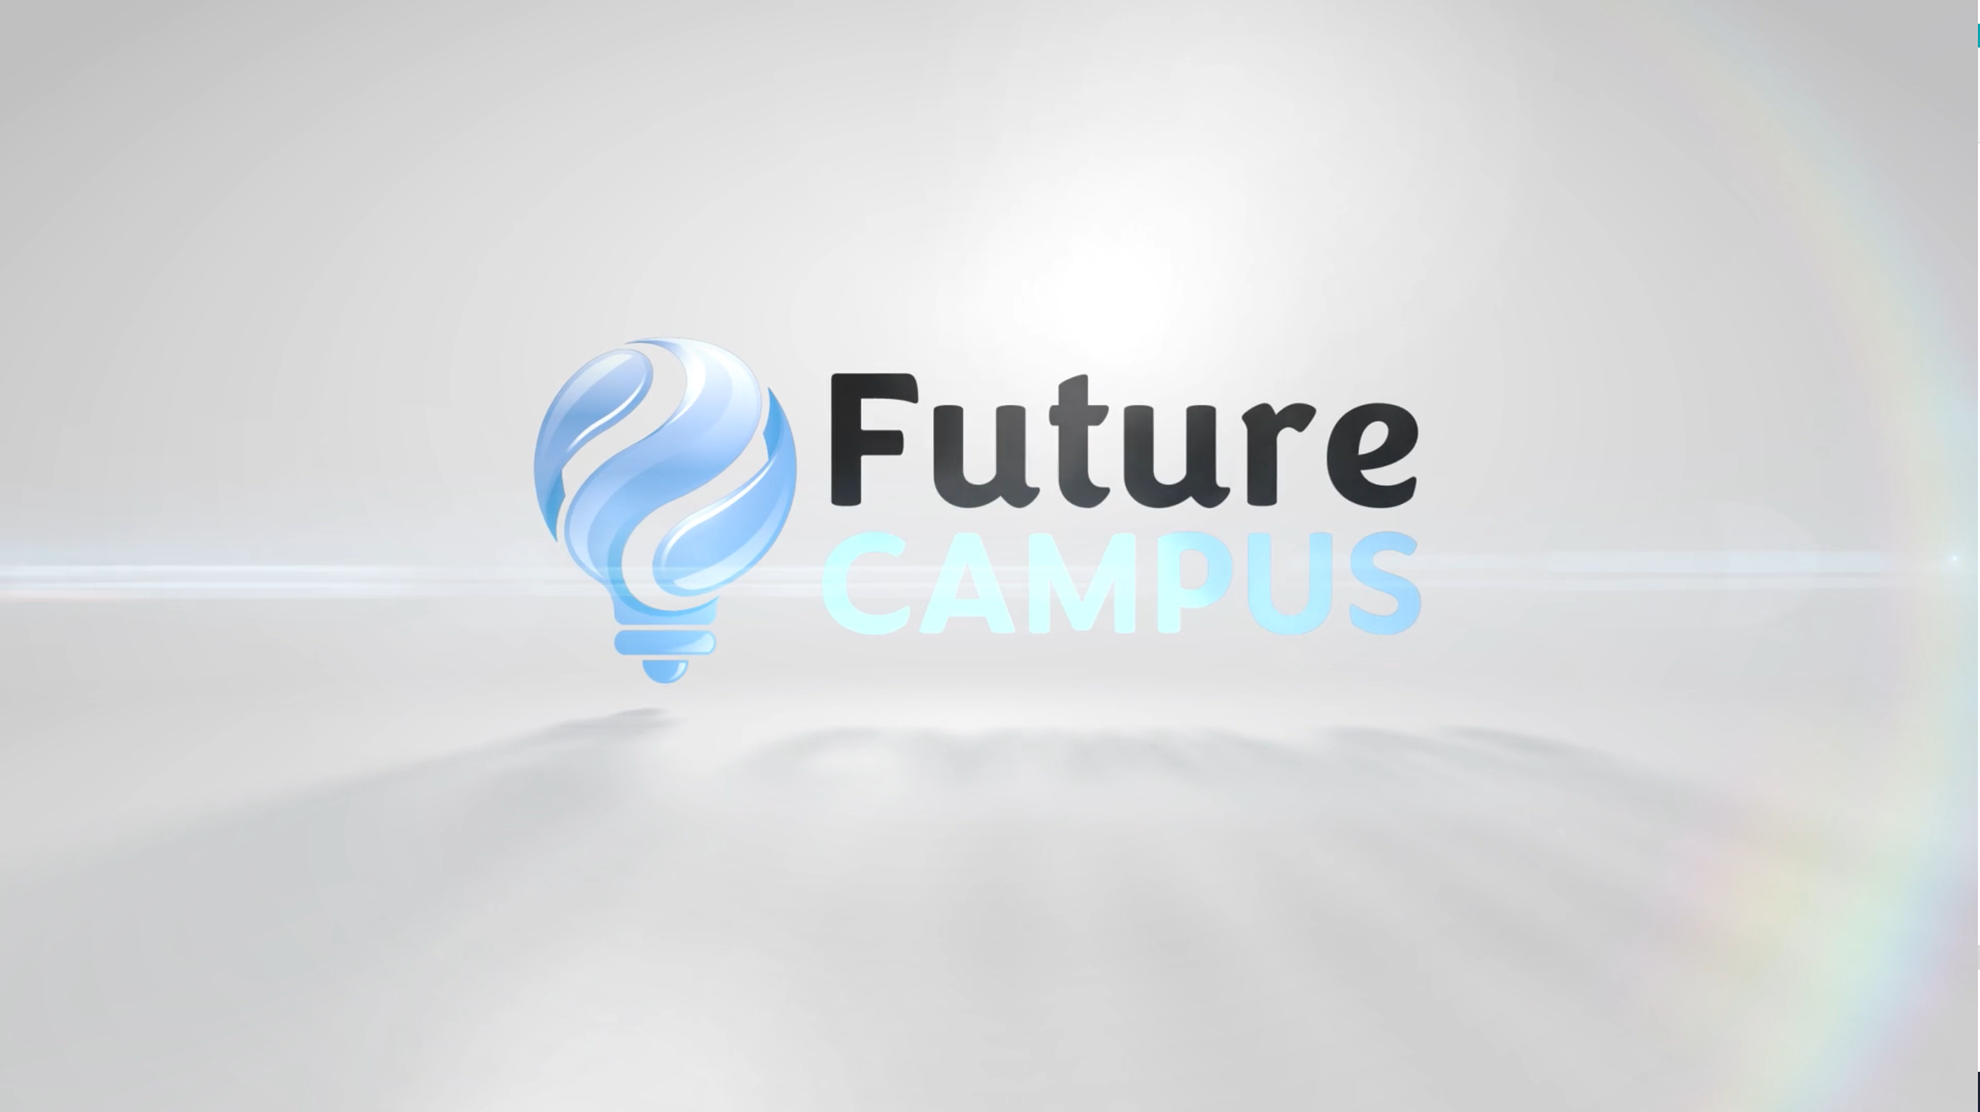 Welcome to Future Campus